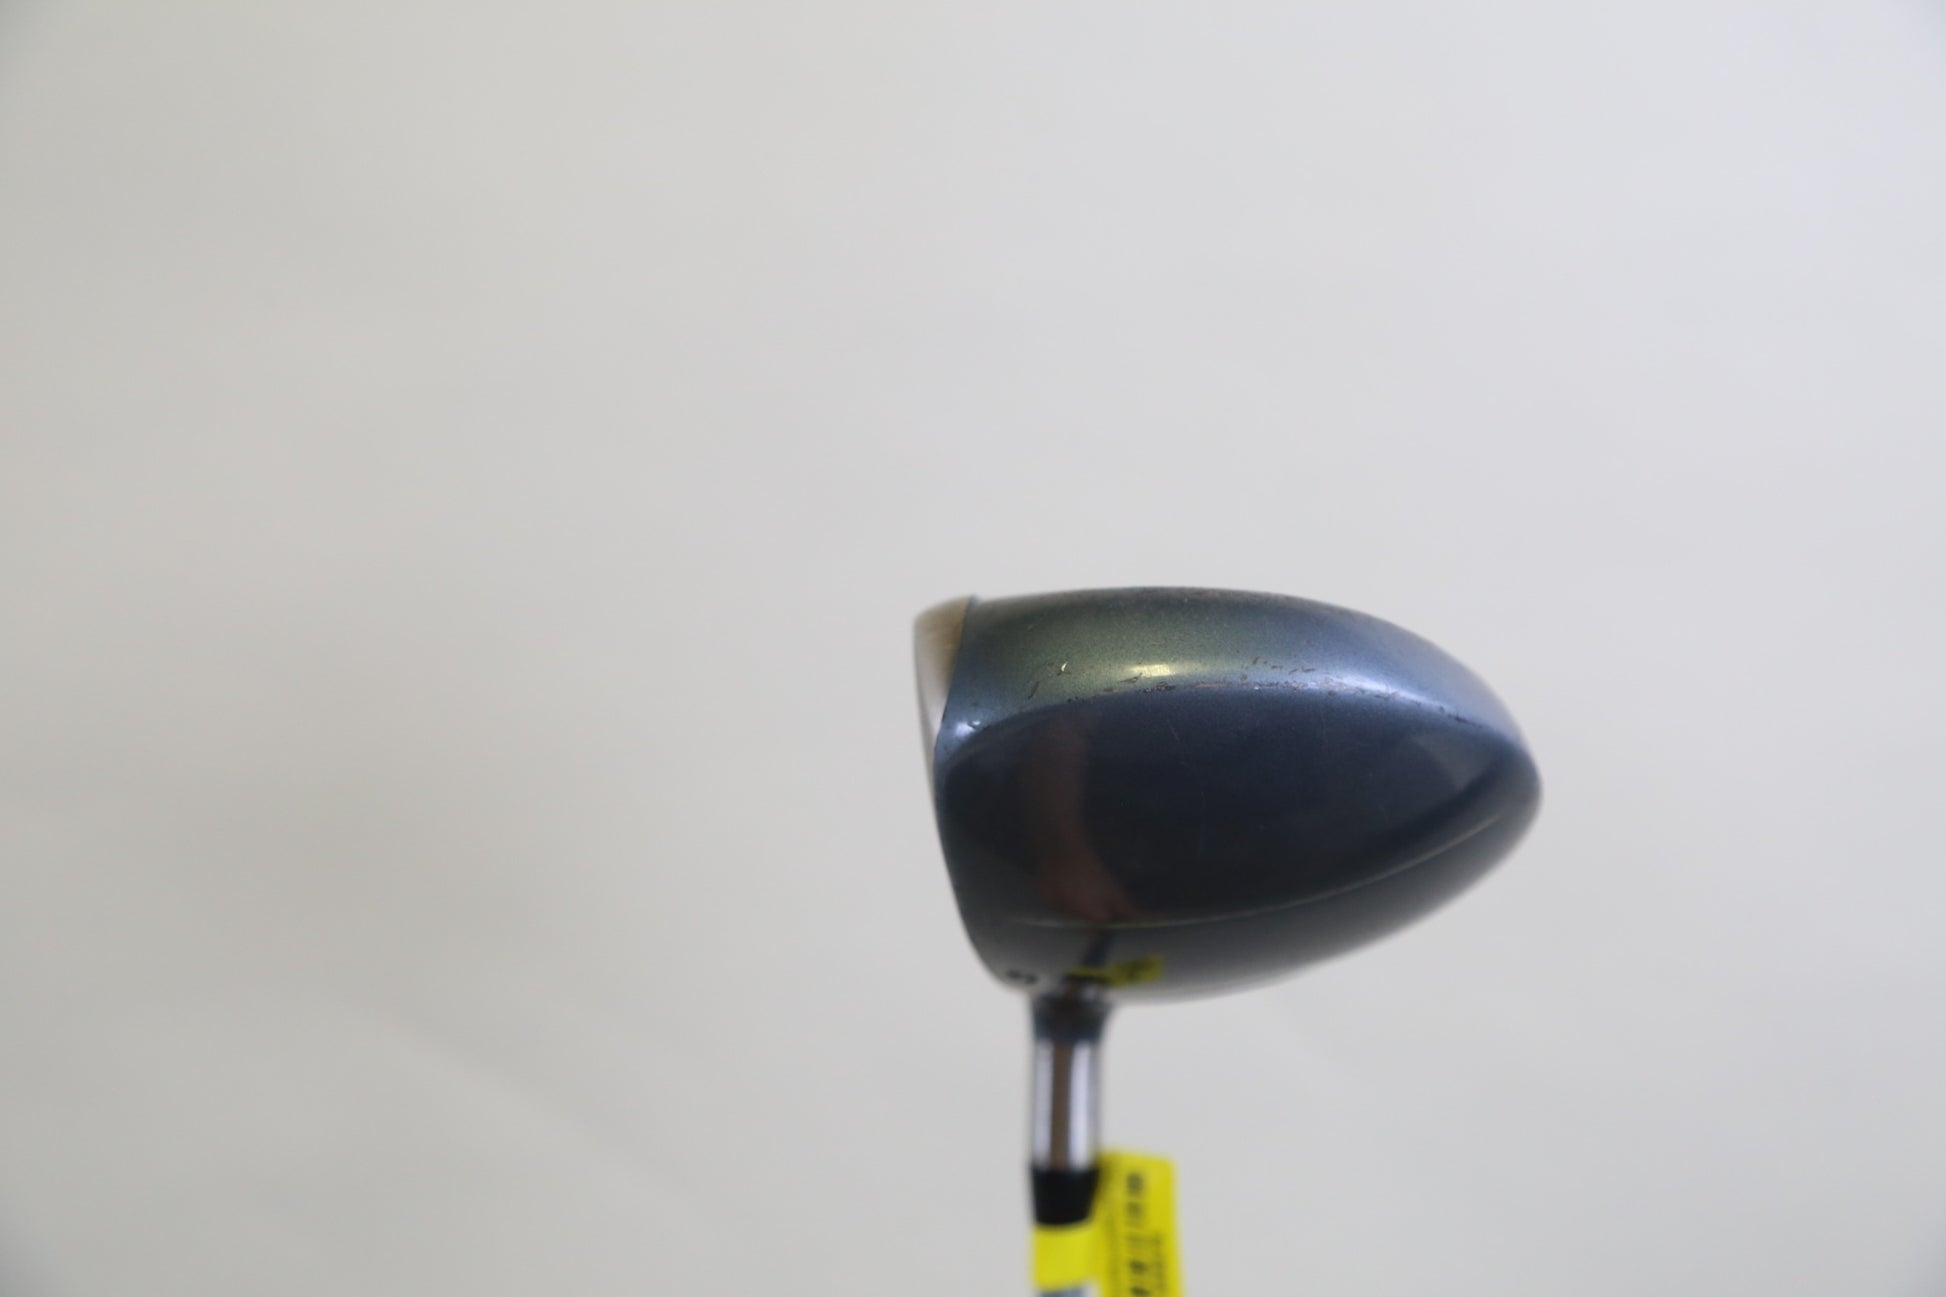 Used TaylorMade 320 Driver - Right-Handed - 12 Degrees - Ladies Flex-Next Round